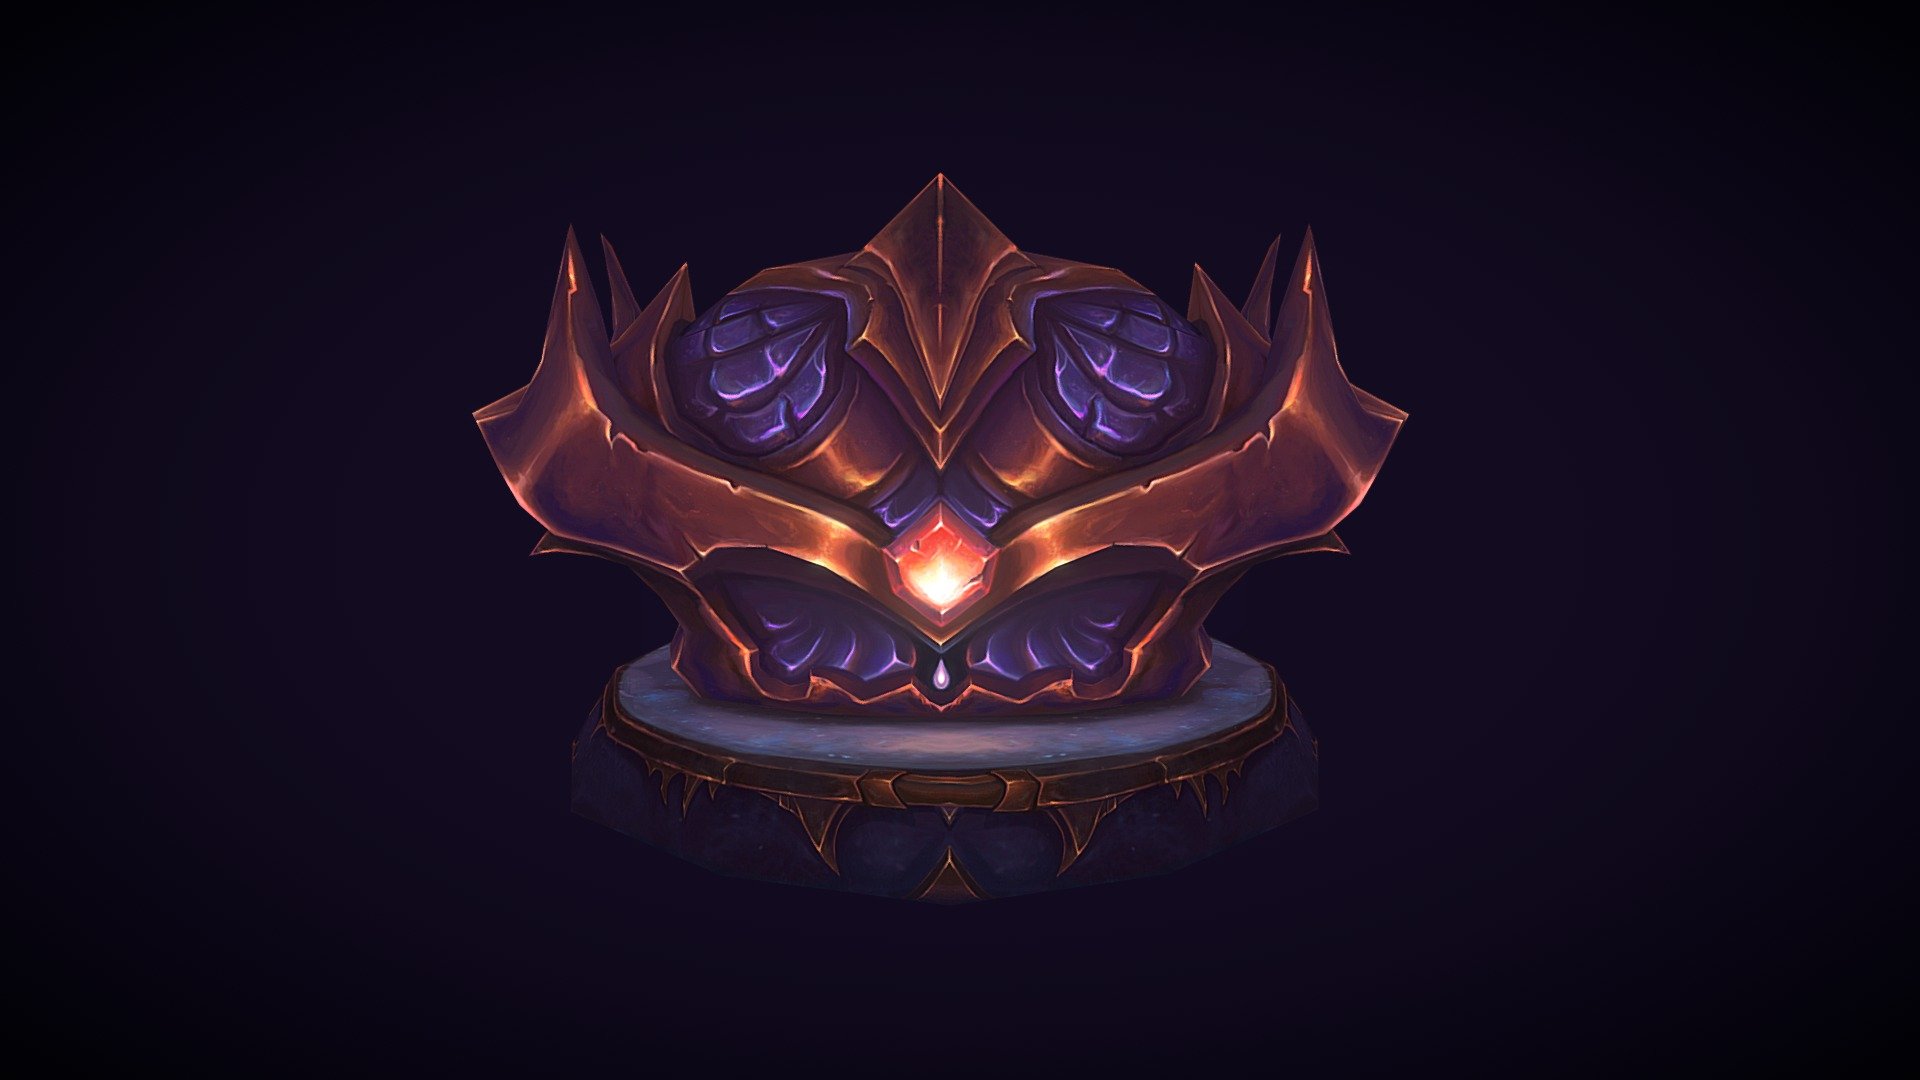 This is a chest that I created, inspired by one of World of Warcraft’s newest zones ‘Nazjatar’. I was captivated by the area, which is why I decided to design a &lsquo;Nazjatar' themed chest. I hope you all like it :)

ArtStation Link -https://www.artstation.com/mnahas - Forgotten Treasures of Nazjatar - 3D model by moe.nahas 3d model